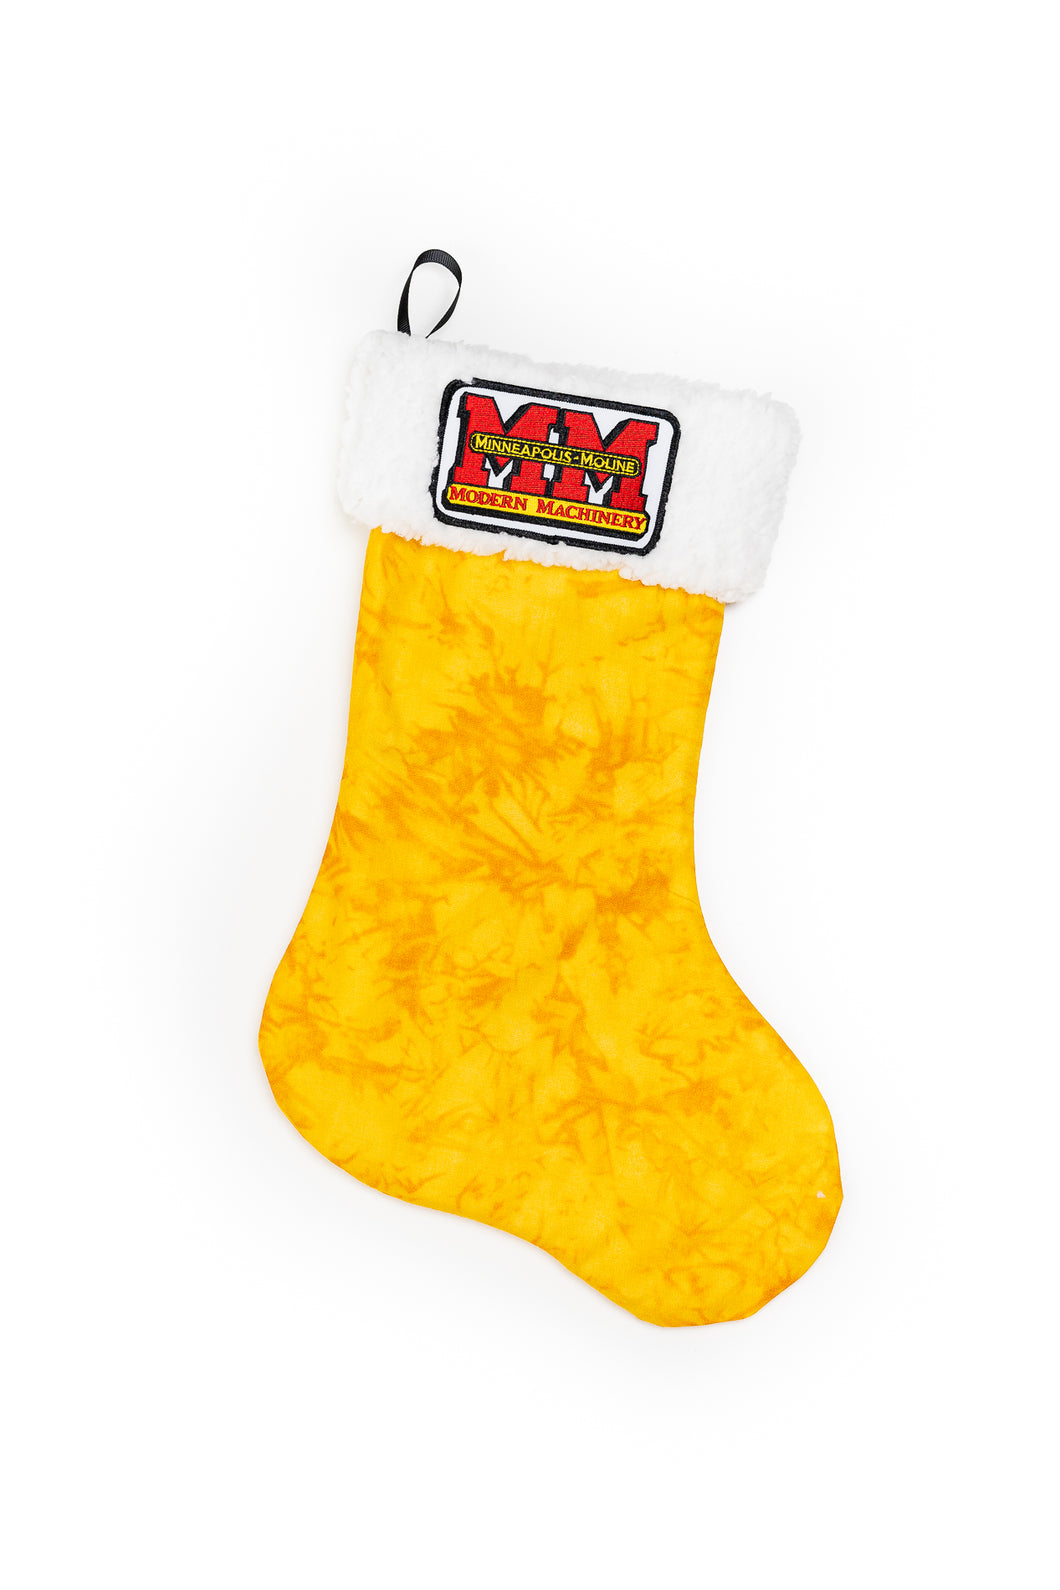 Minneapolis Moline Christmas Stocking, Gold Print with MM Logo on Cuff